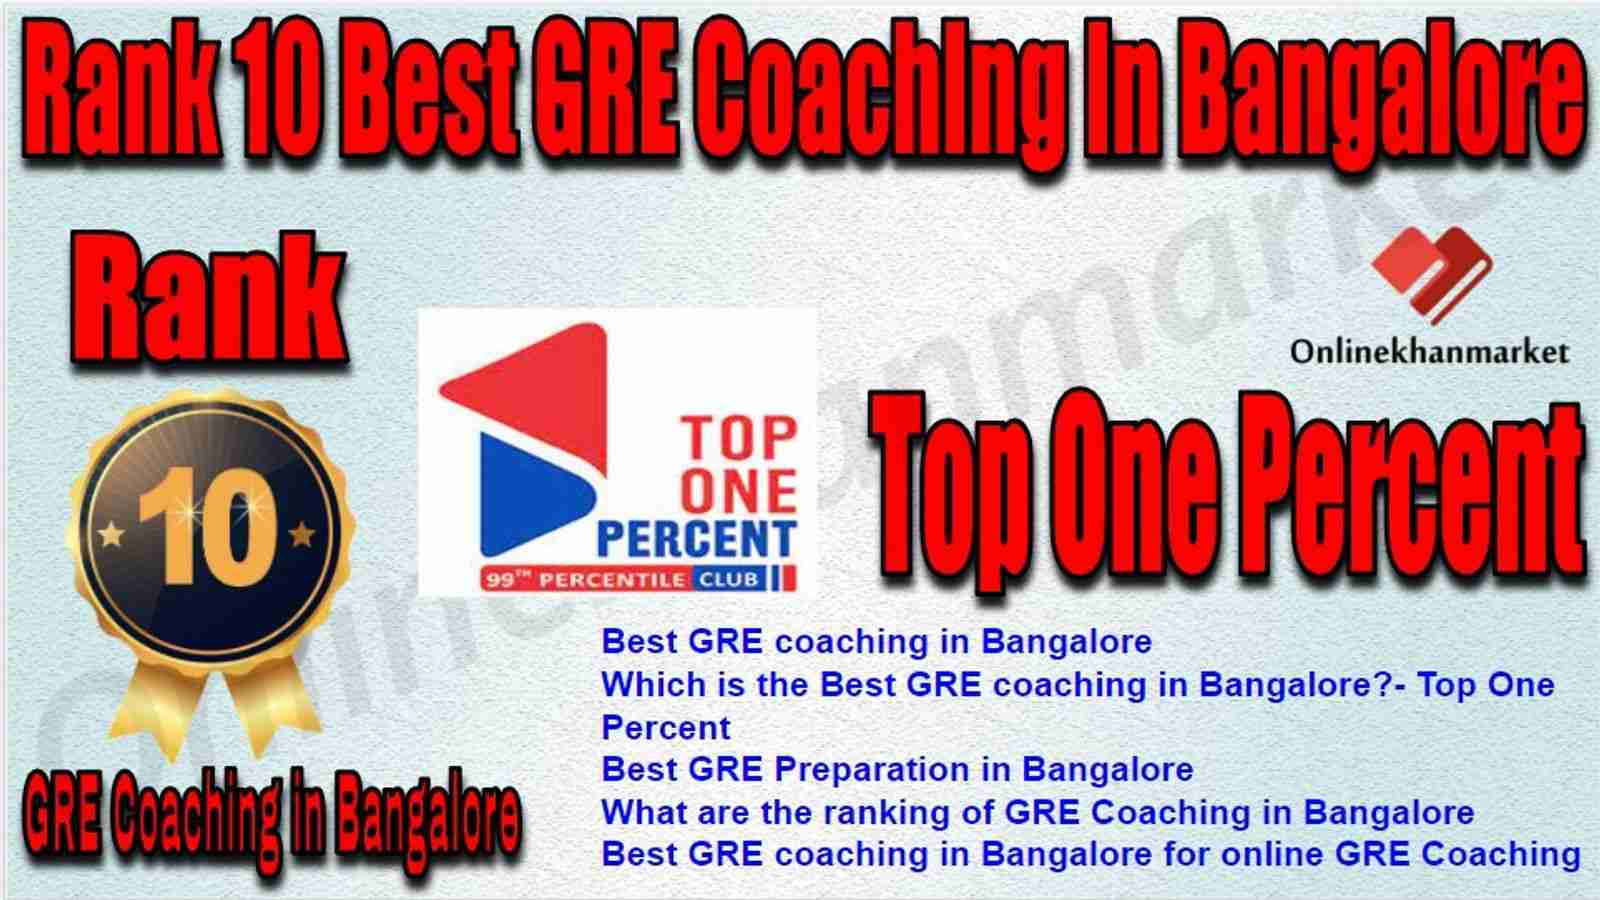 Rank 10 Best GRE Coaching in Bangalore